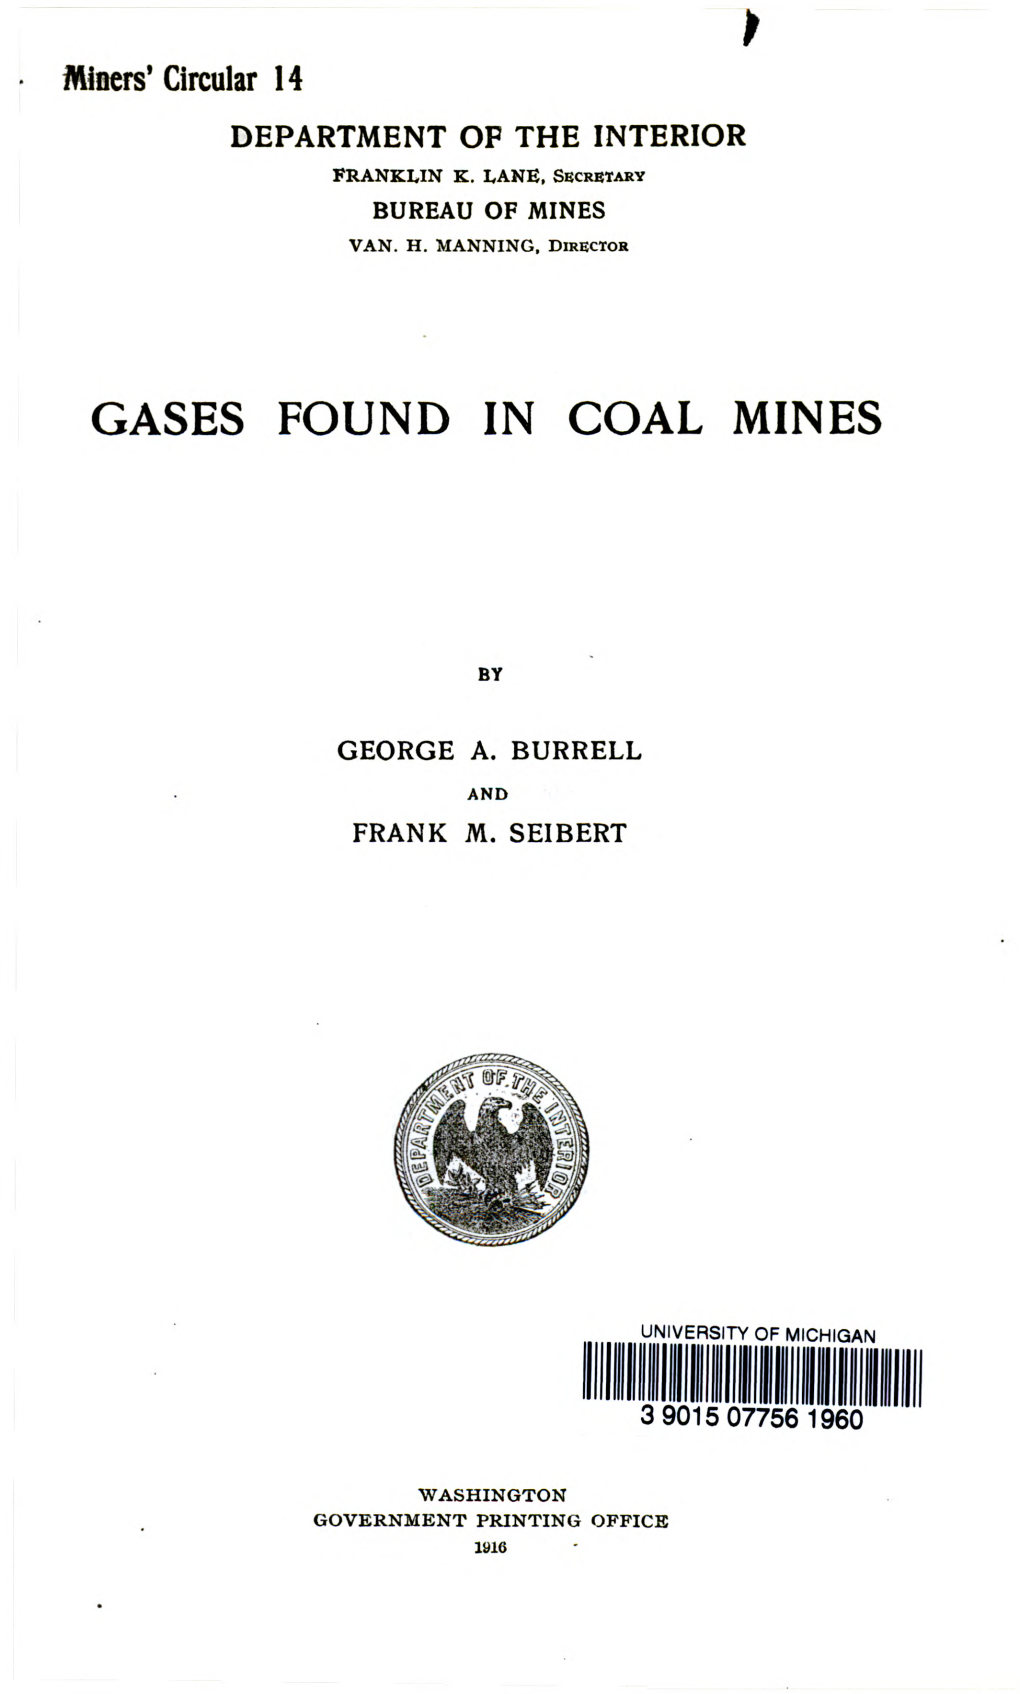 Gases Found in Coal Mines